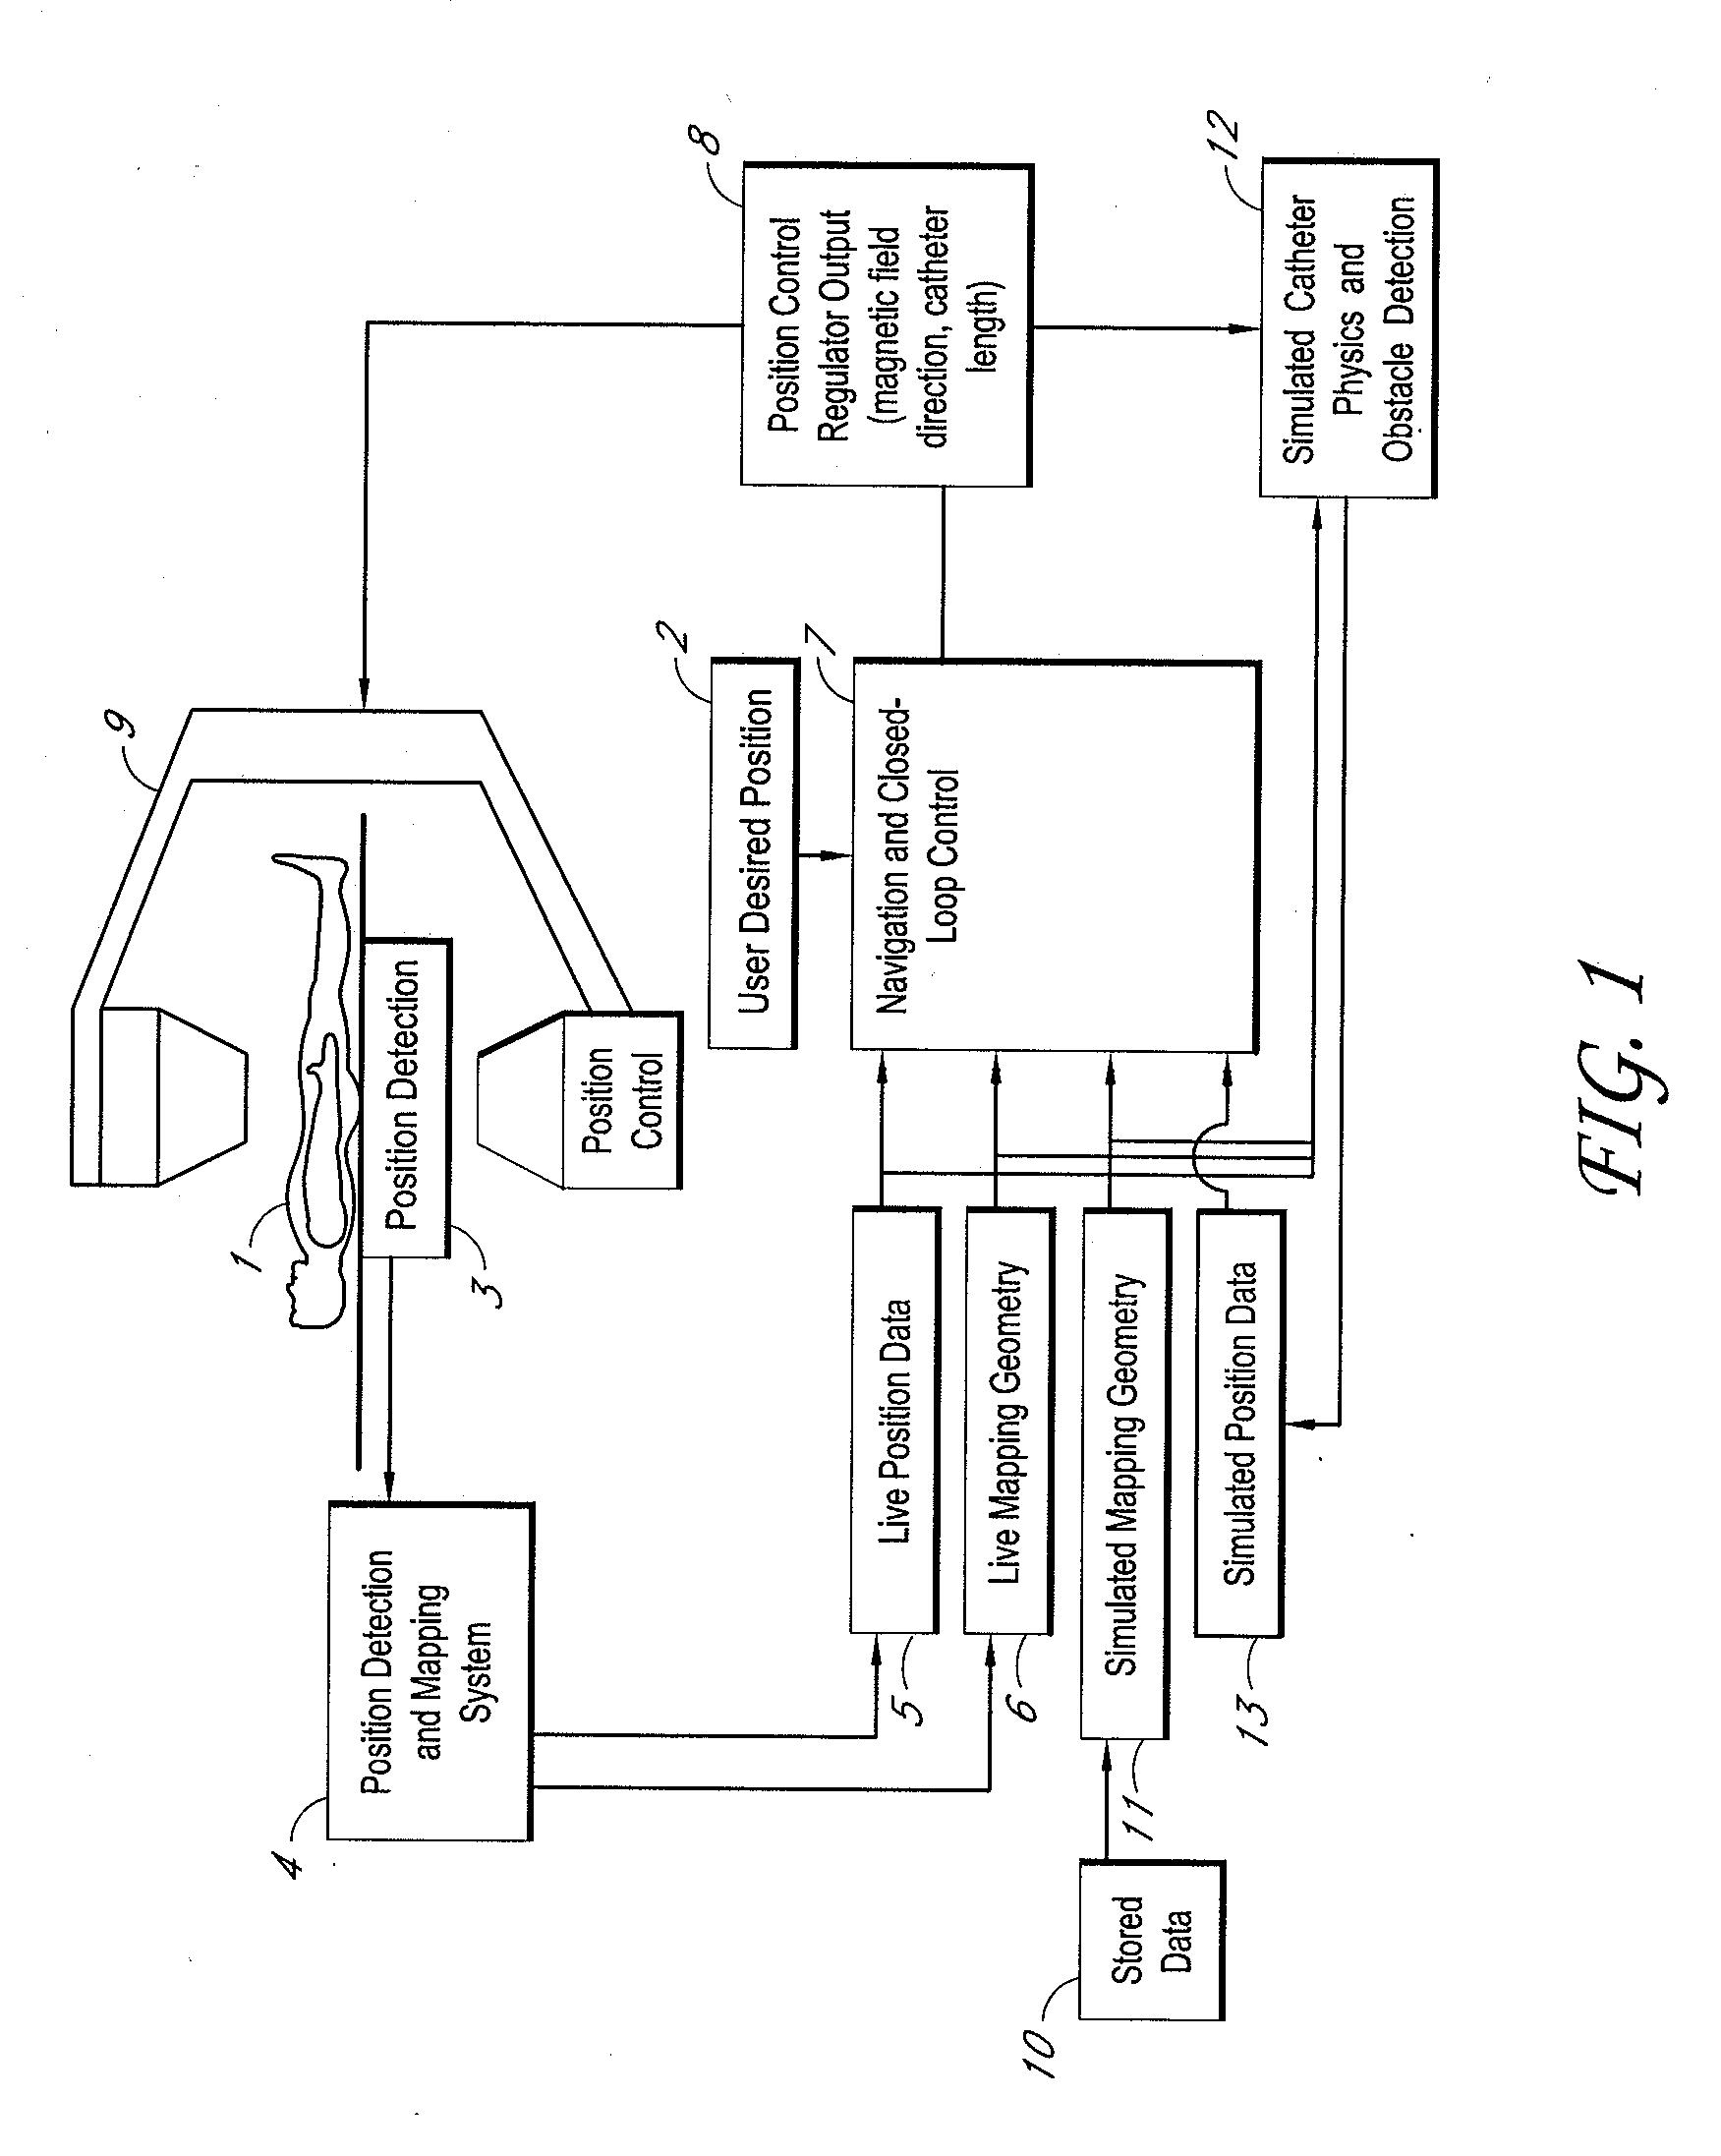 Method for simulating a catheter guidance system for control, development and training applications